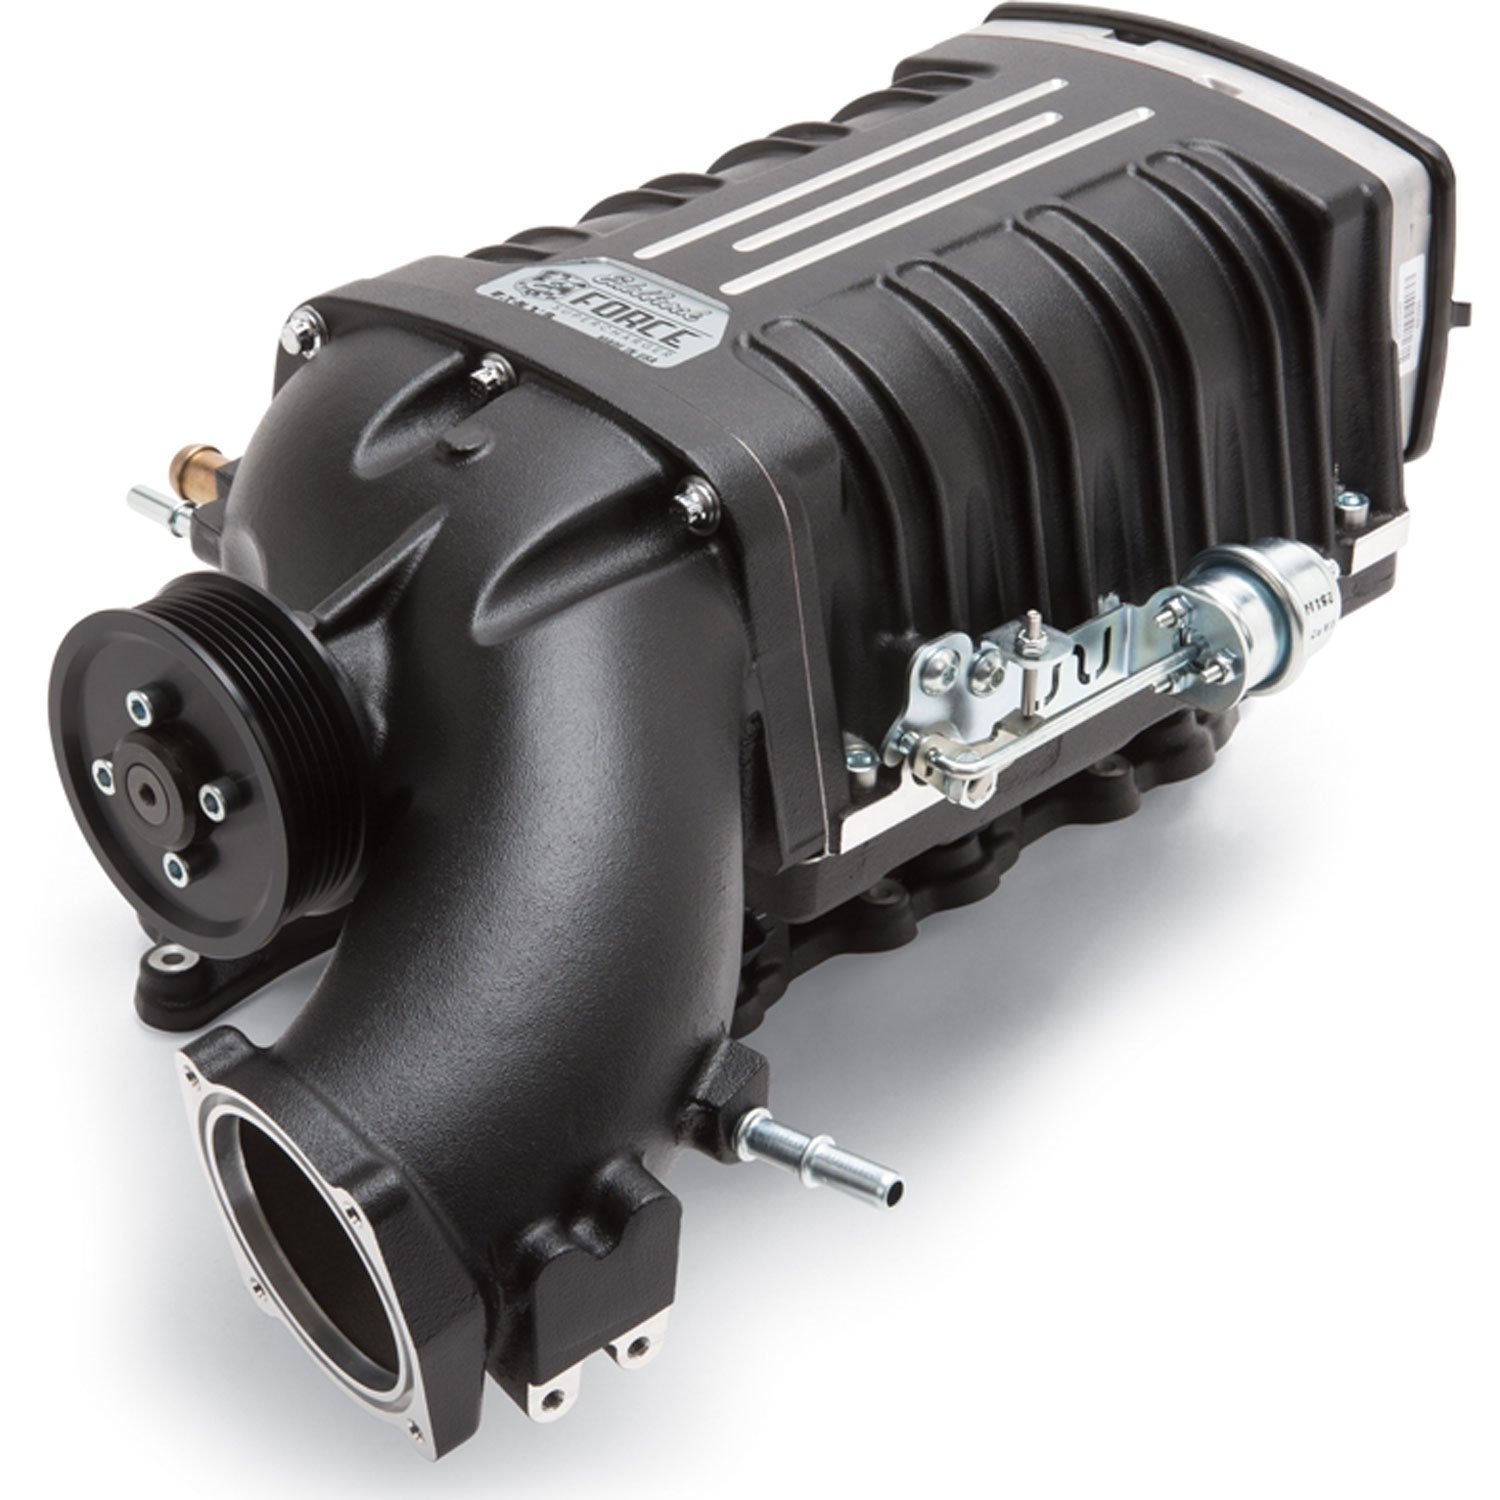 Stage-1 Street Supercharger System for 2012-2014 Jeep Wrangler